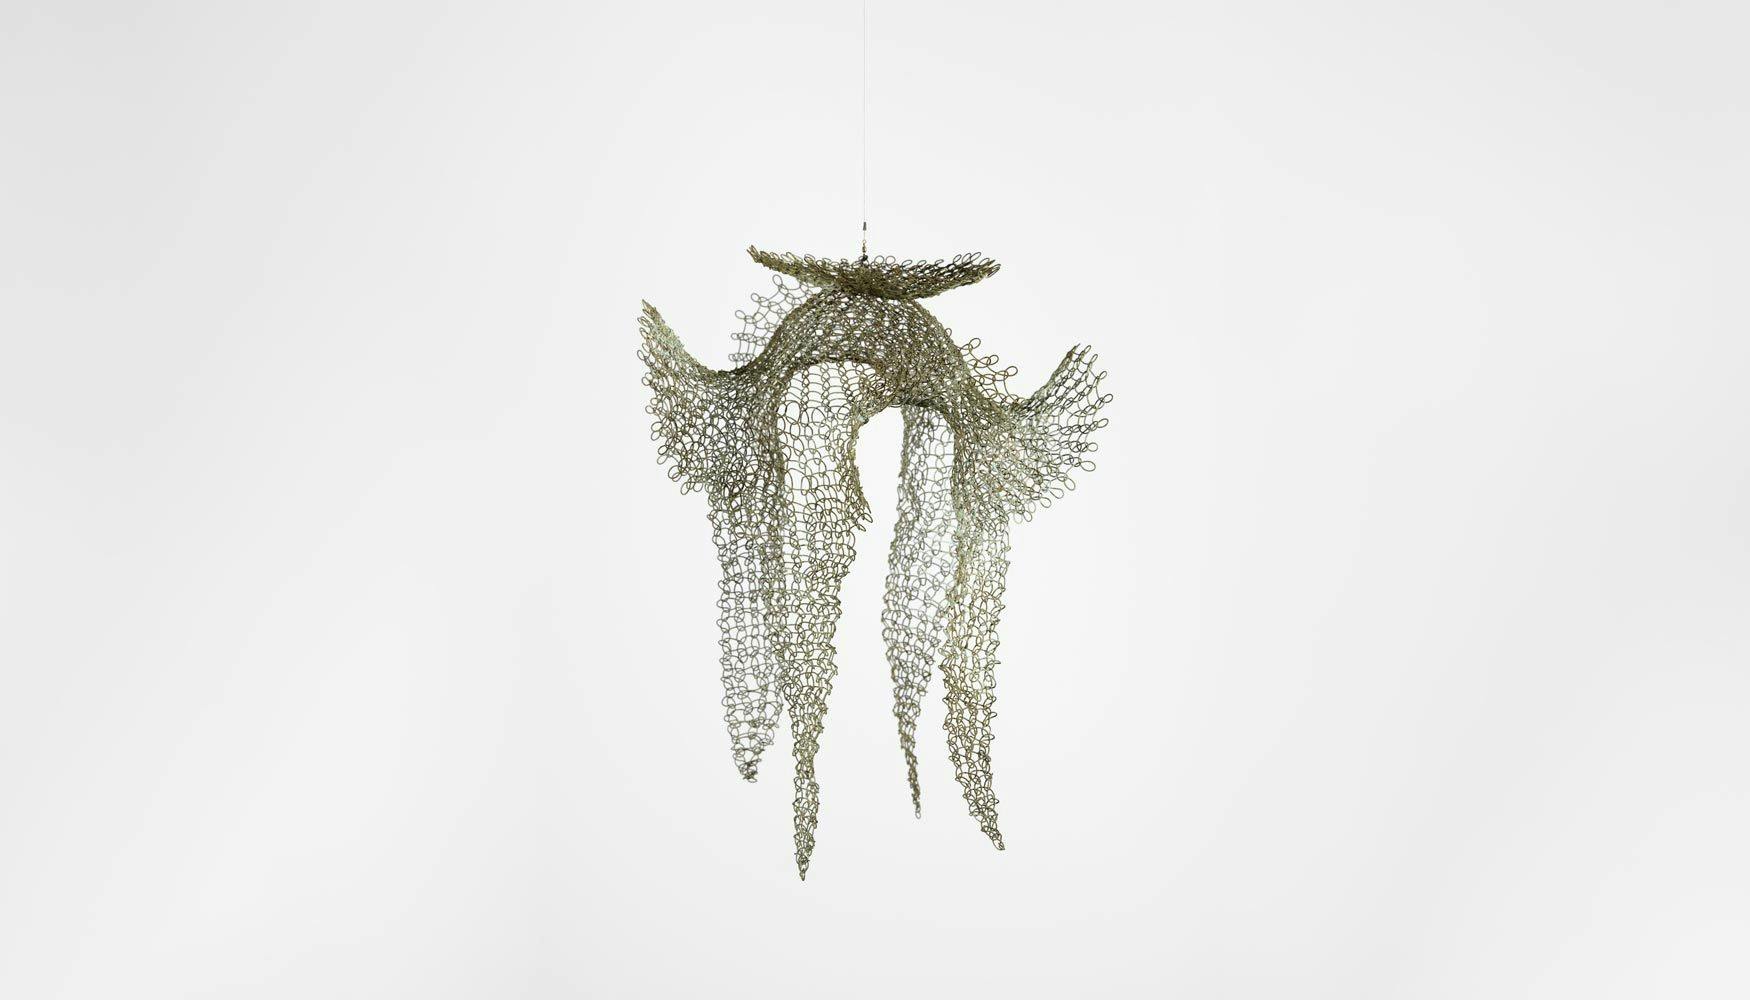 A mixed media artwork by Ruth Asawa, titled Untitled (S.459, Hanging Open Form with a Disc, Four Upward Ears, and Four Downward Tails), circa 1950 to 1959.